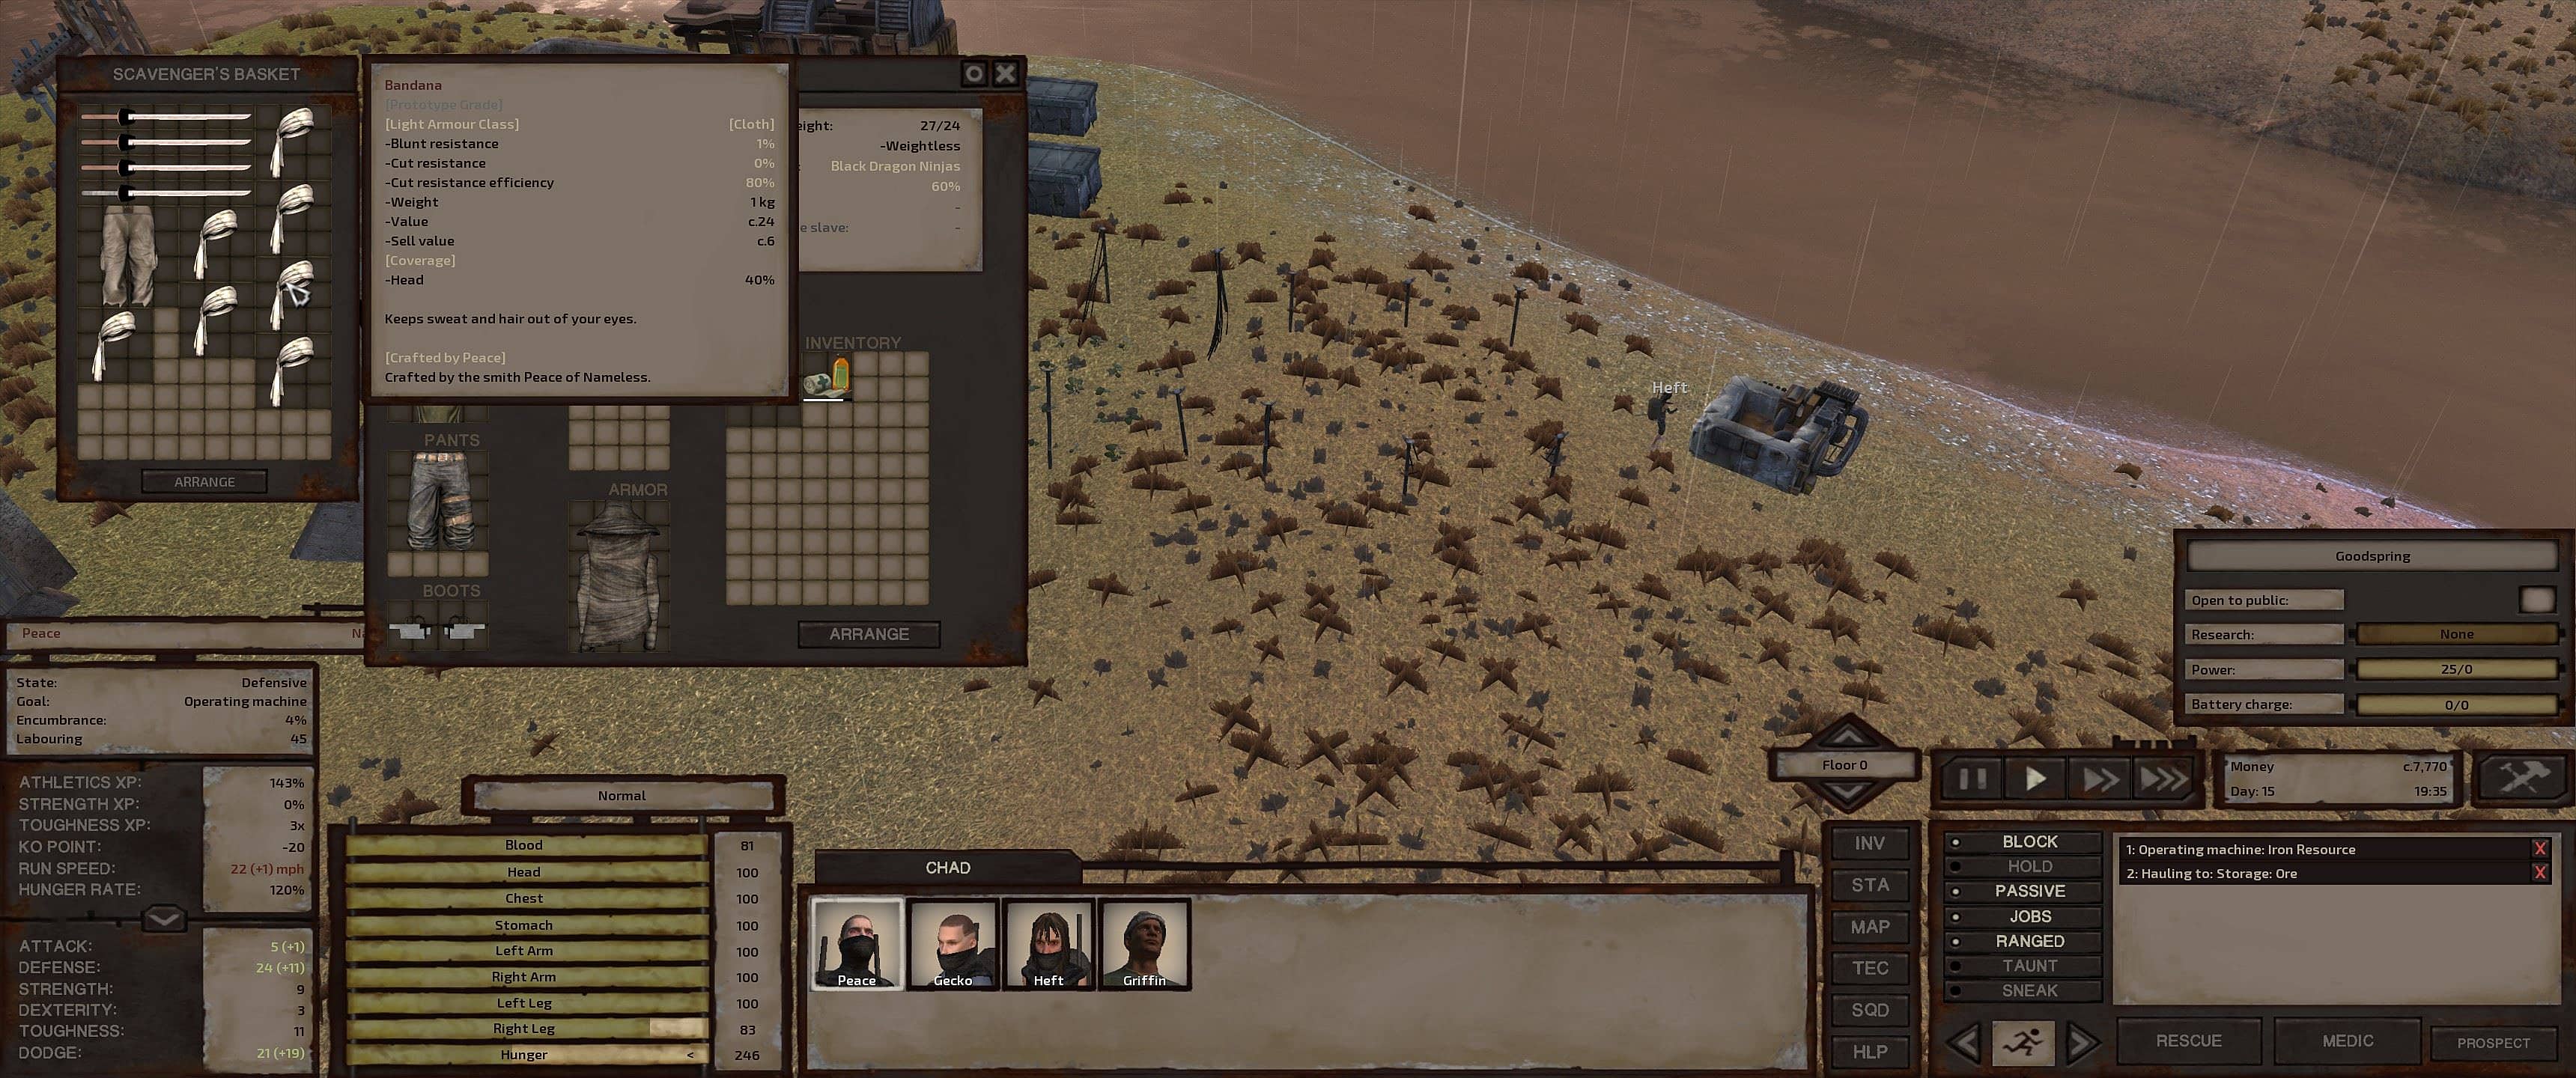 kenshi how to make money early game